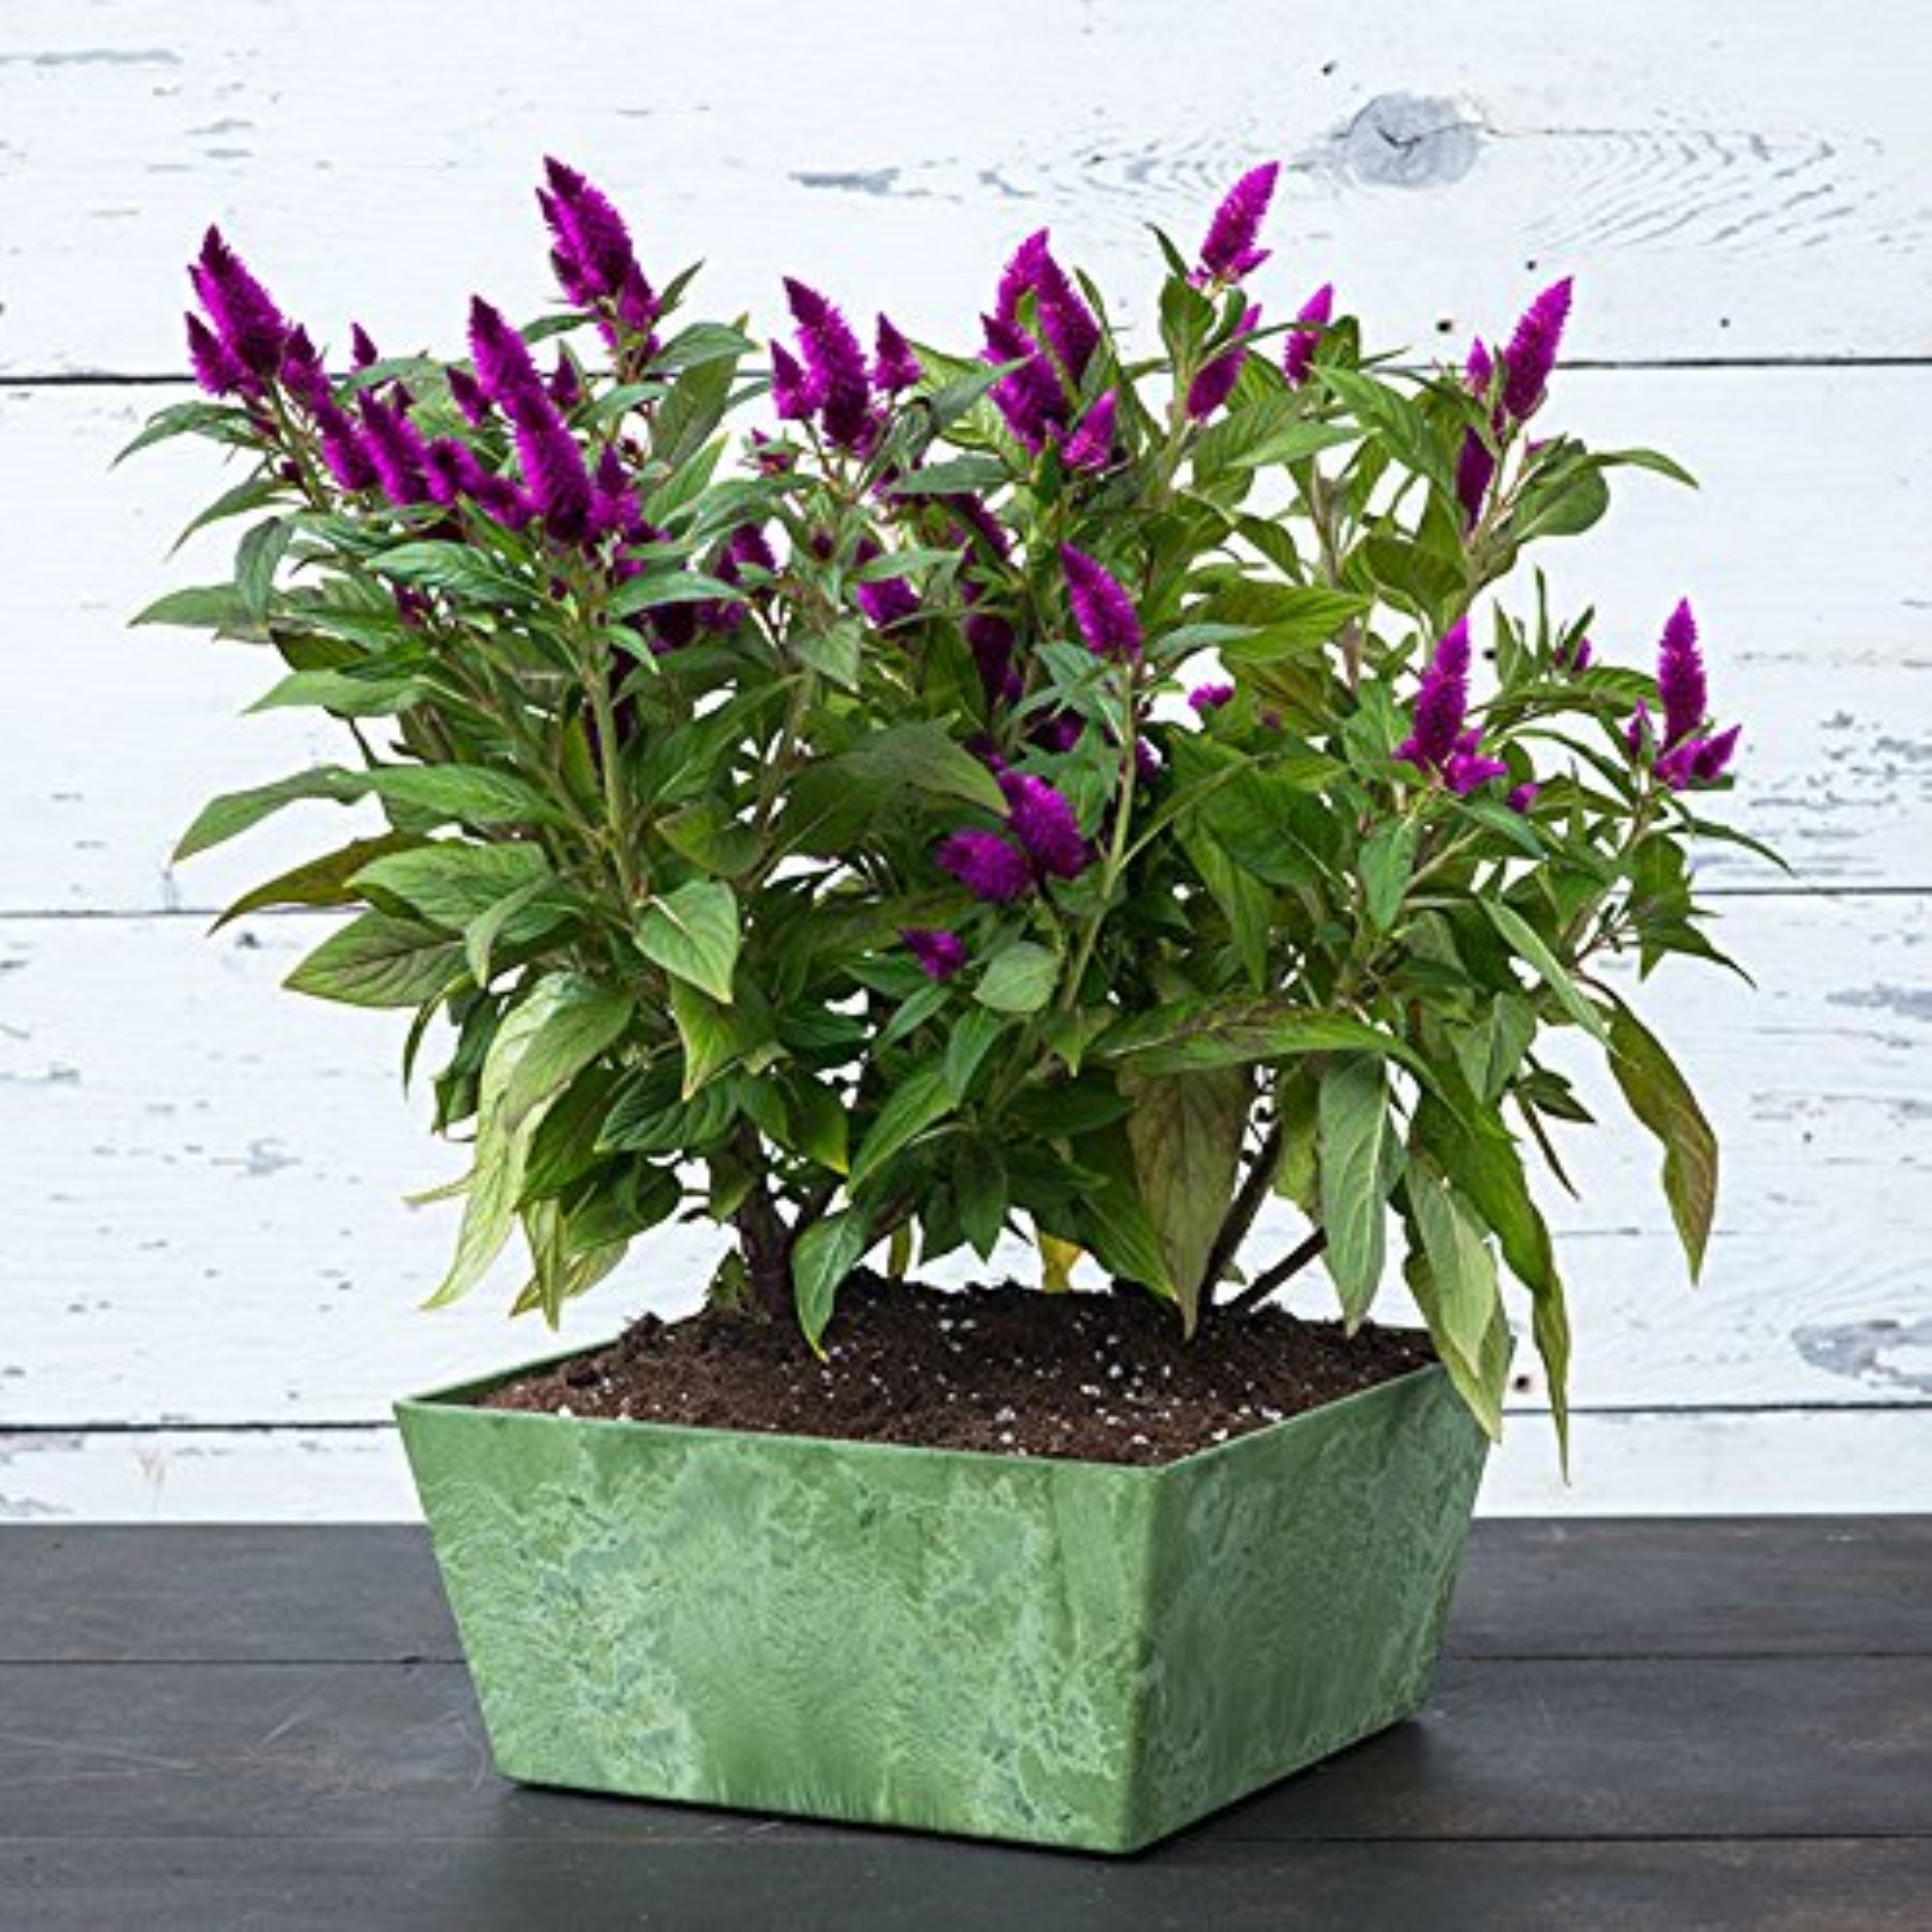 Novelty ArtStone Low Square Ella Planters with Self-Watering System